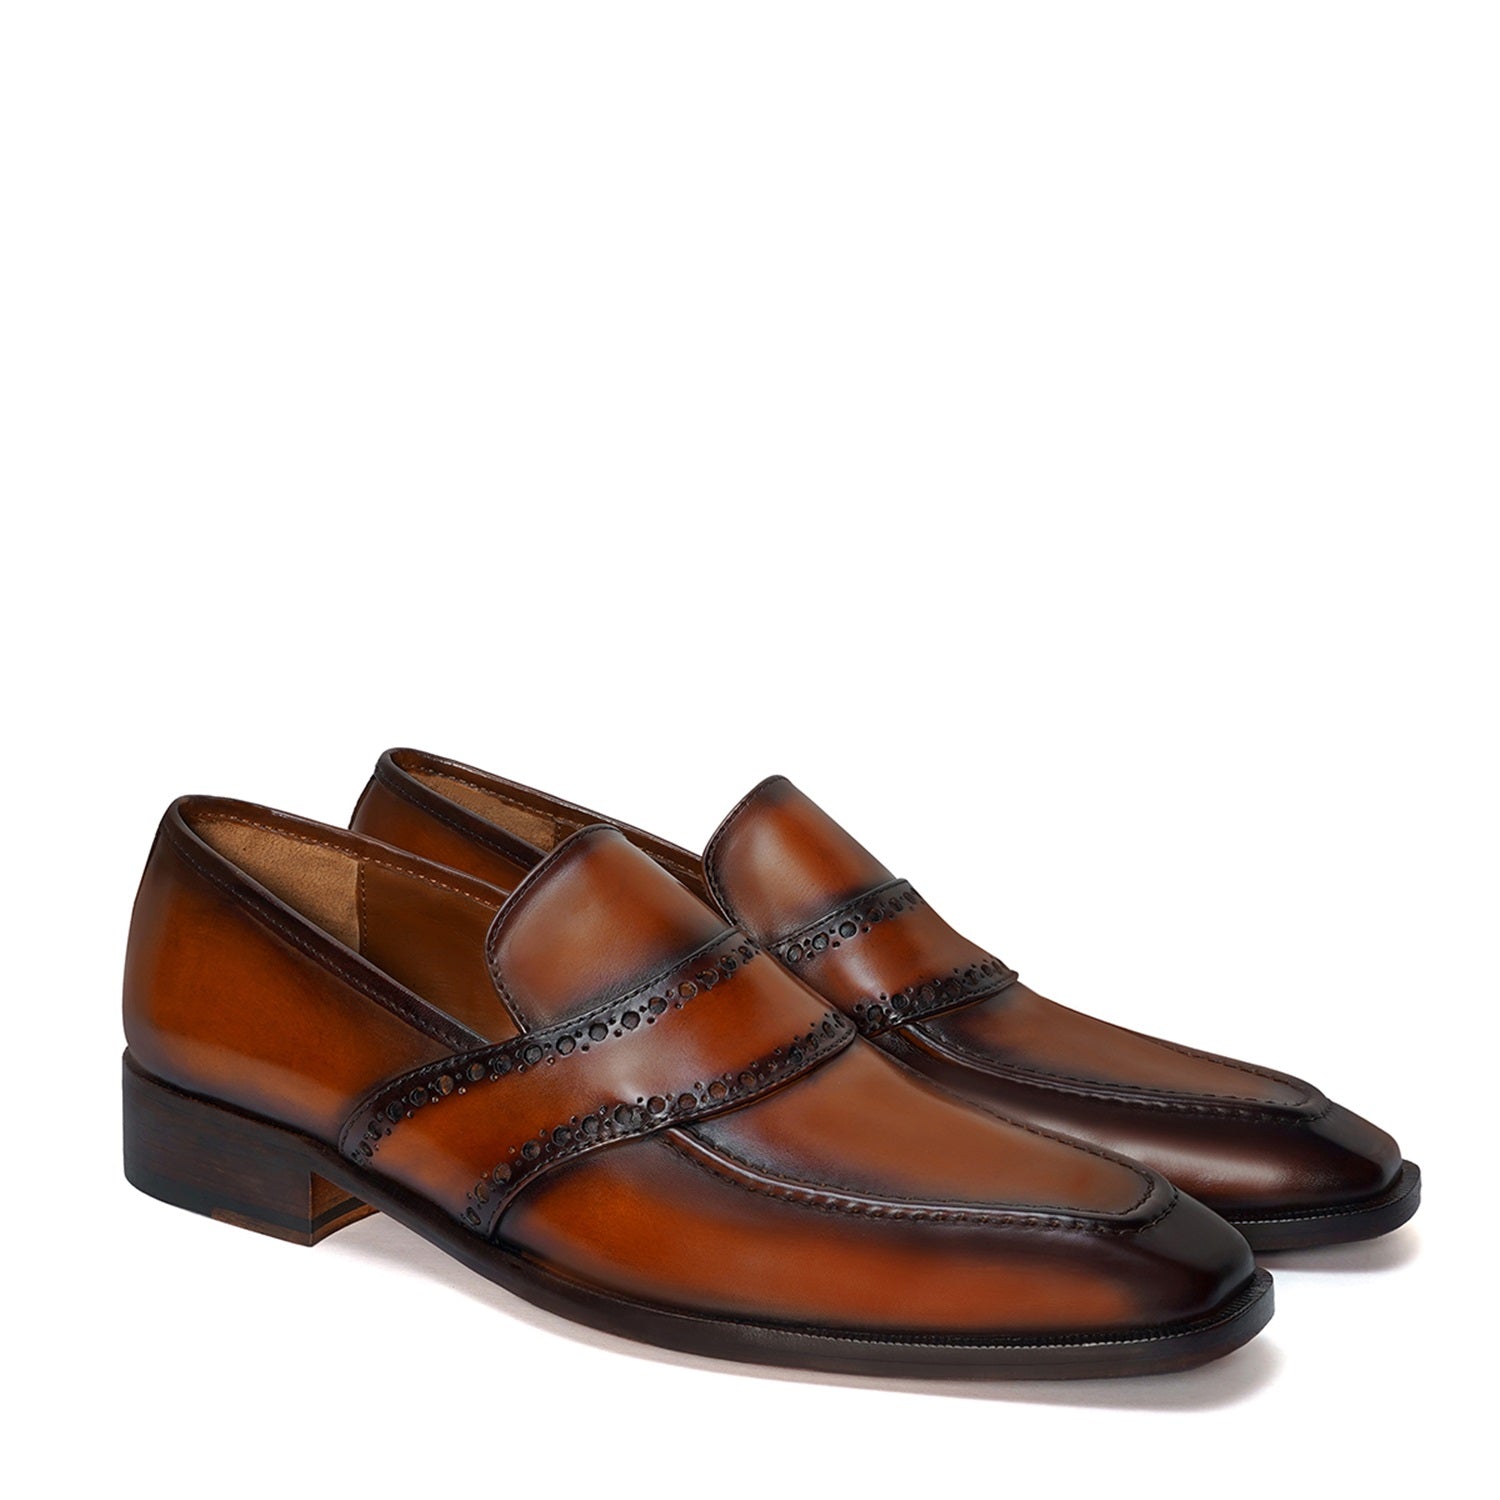 Punching Brogue Strap Loafers Burnished Cognac Leather Slip-On Shoes